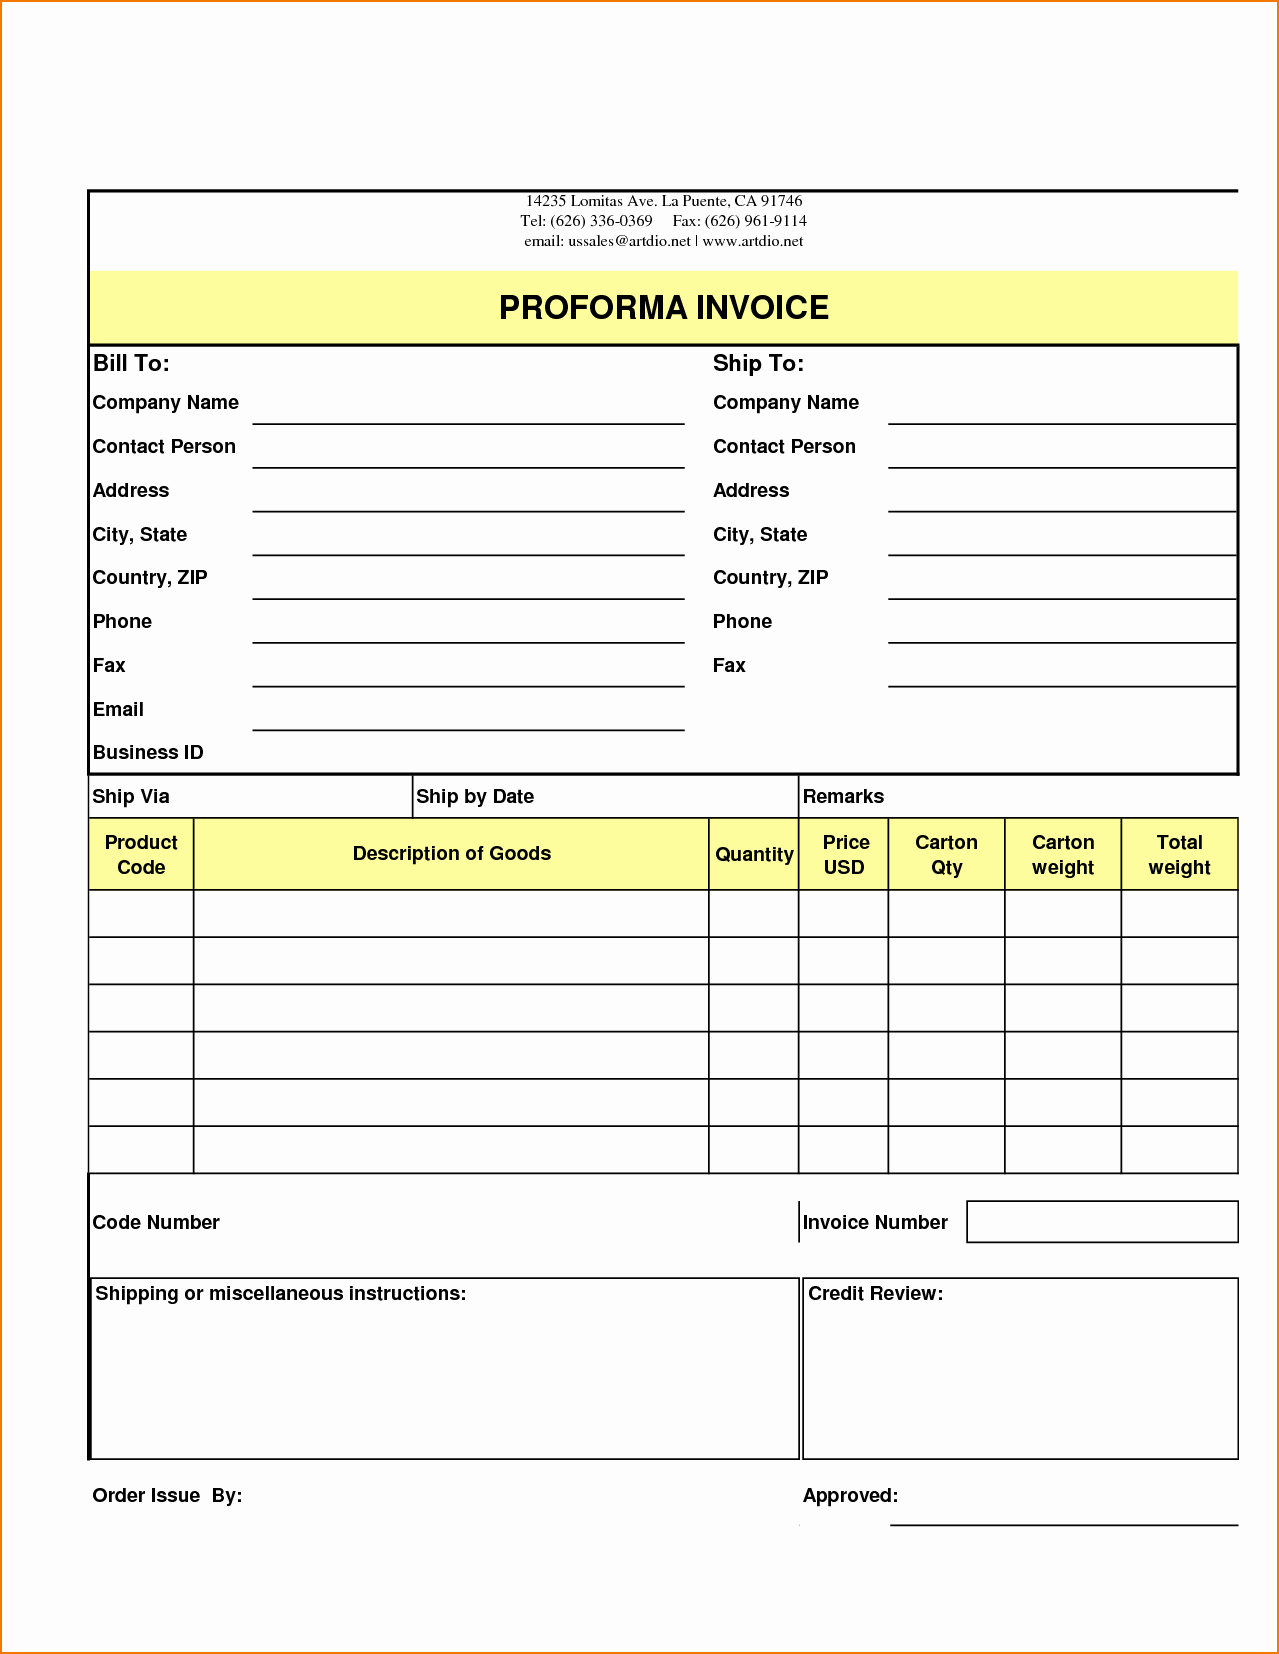 Excel order form Template Awesome 5 order form Template Excel